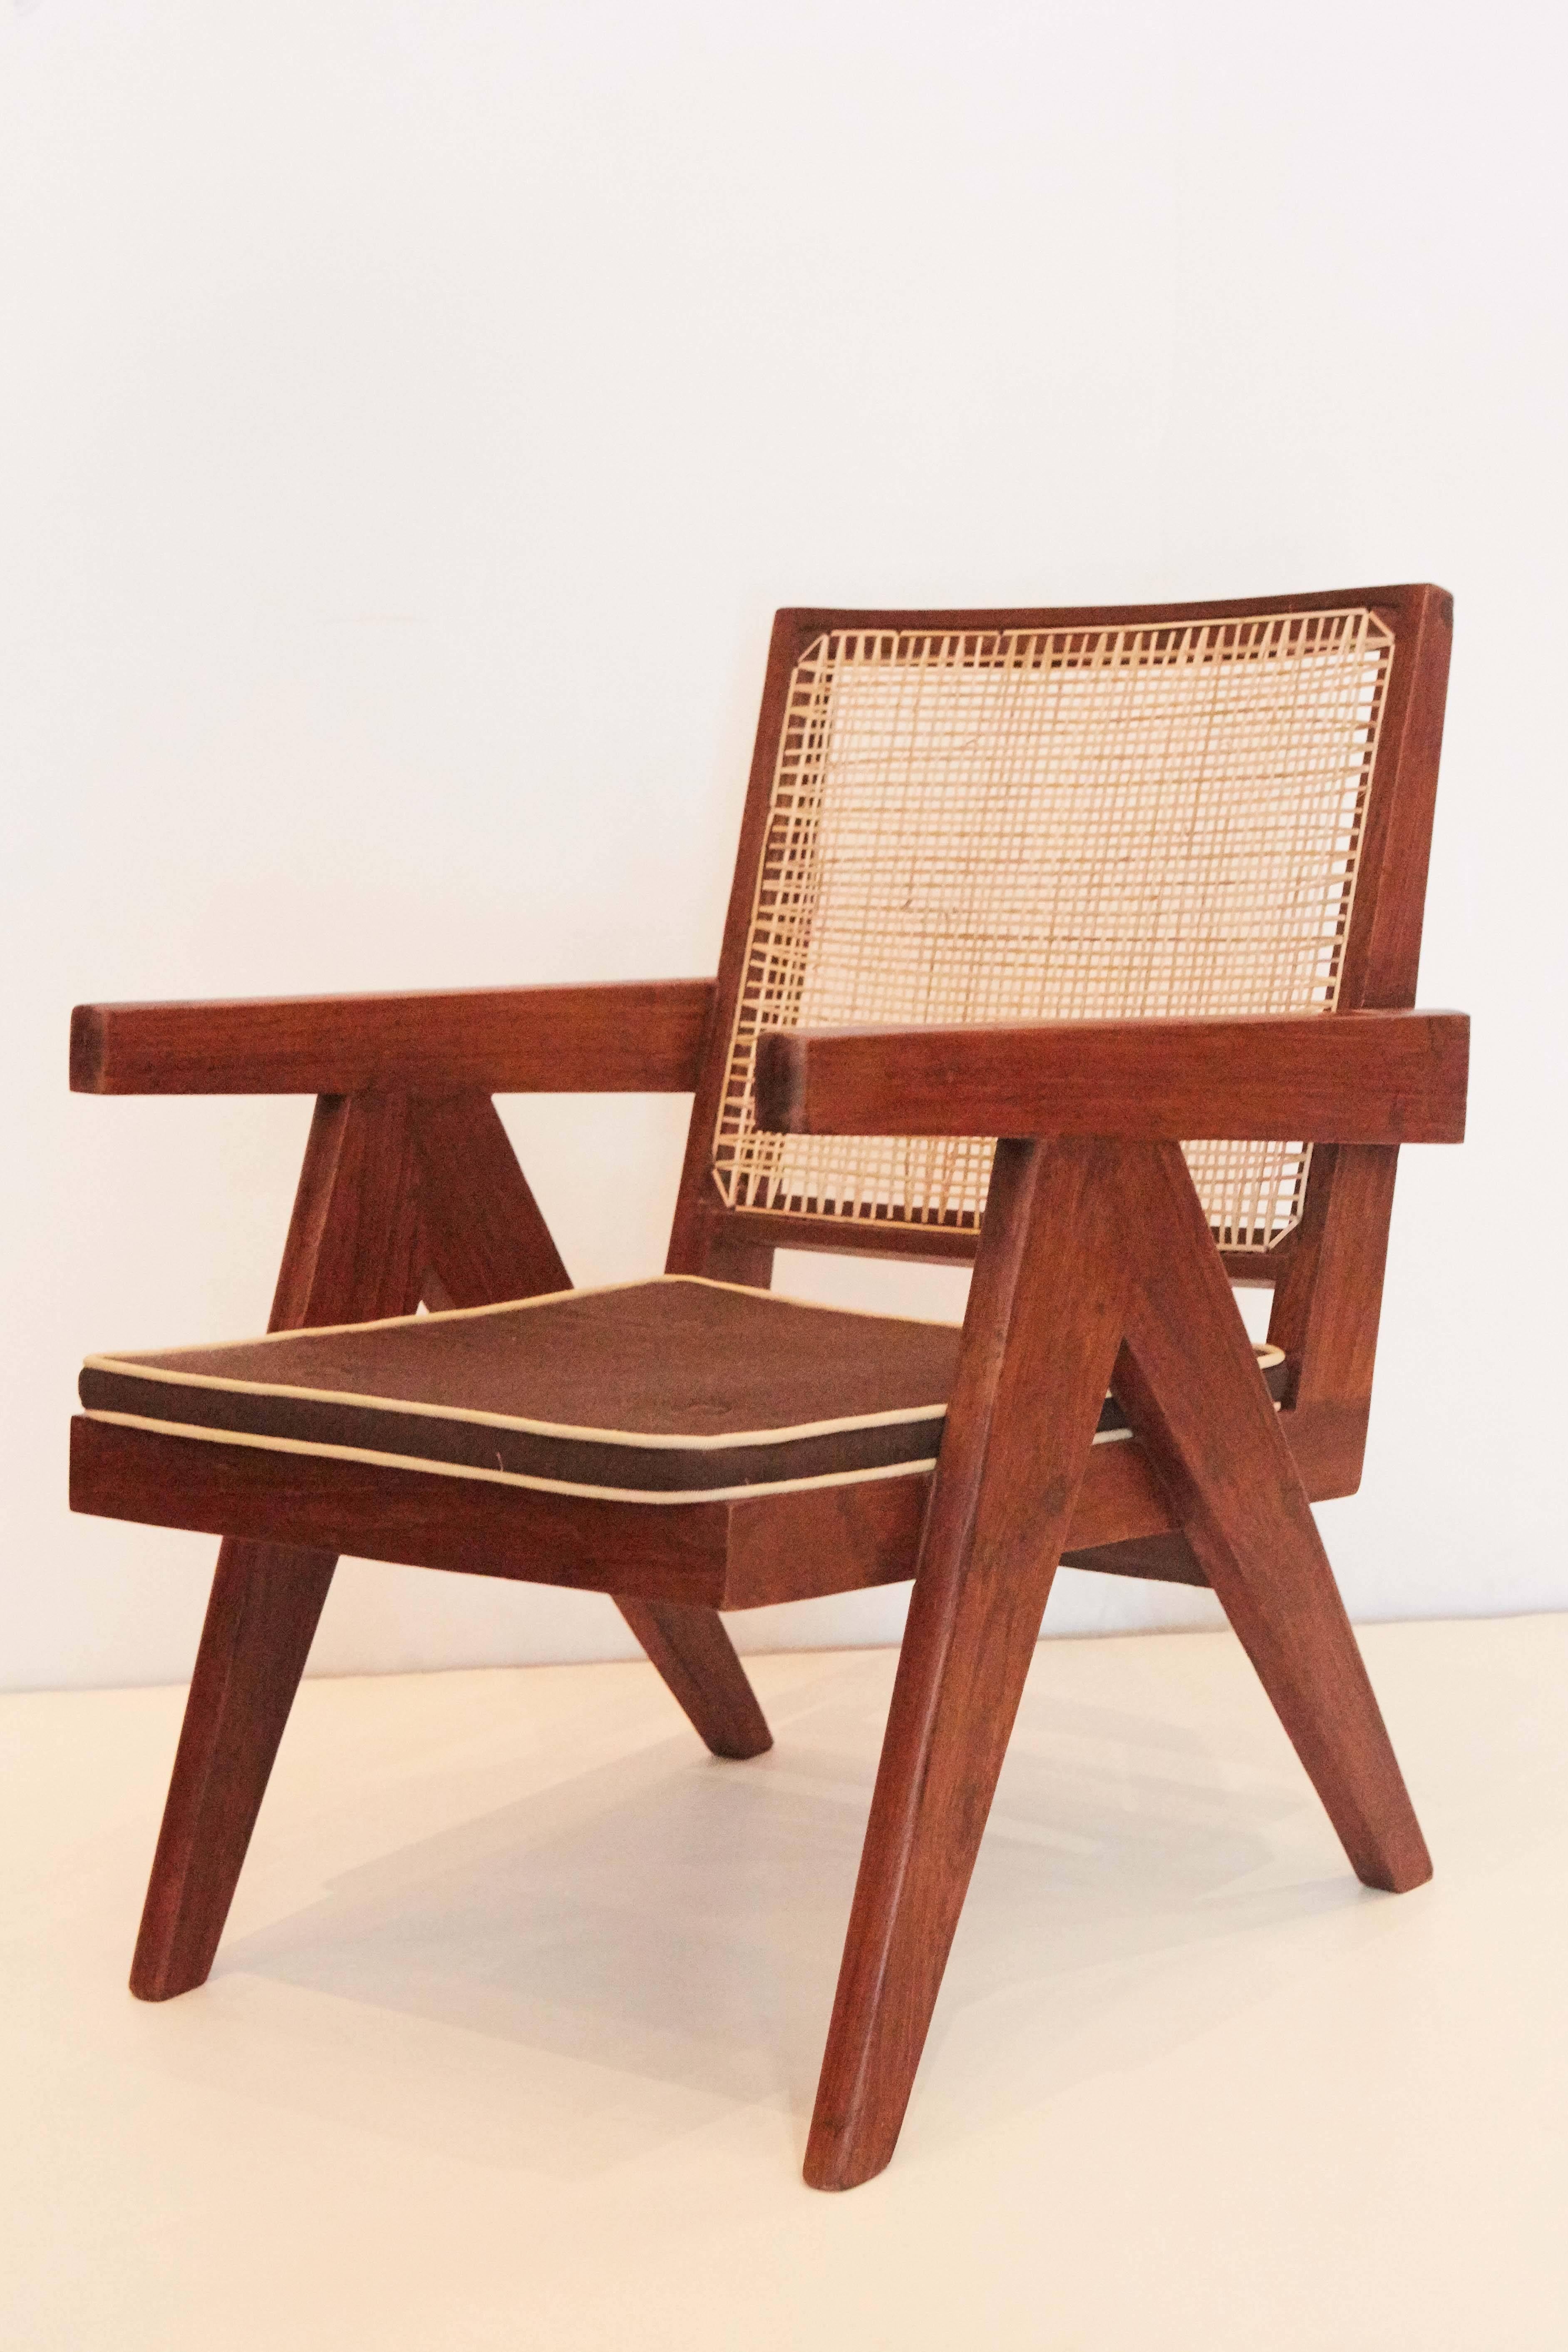 Pair of Pierre Jeanneret & Le Corbusier Easy Chairs, India / France, 1955 In Good Condition For Sale In Los Angeles, CA